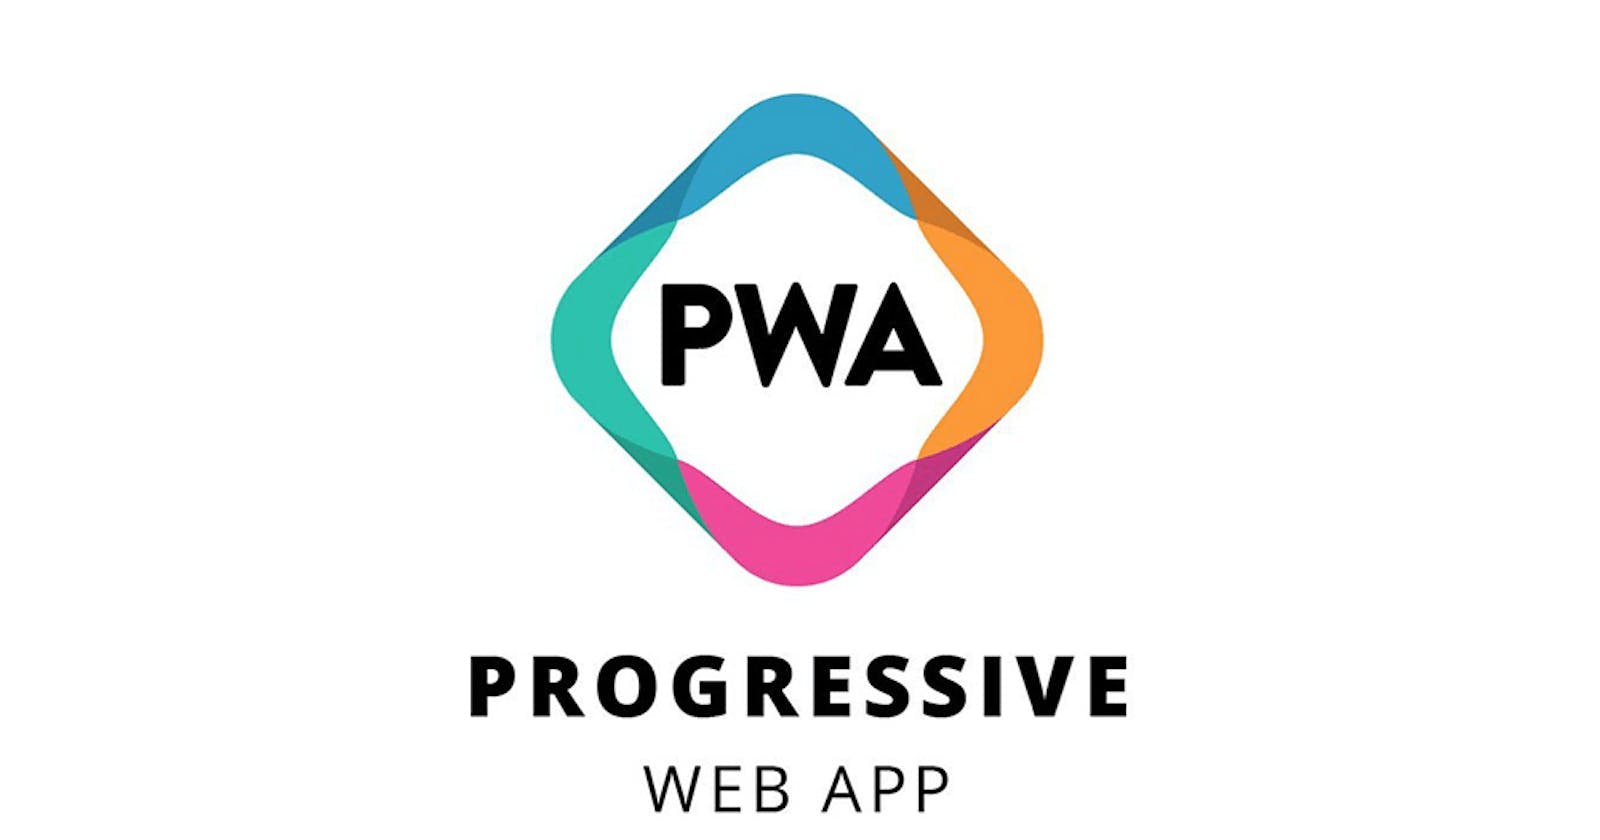 What is a PWA and how do I build it?